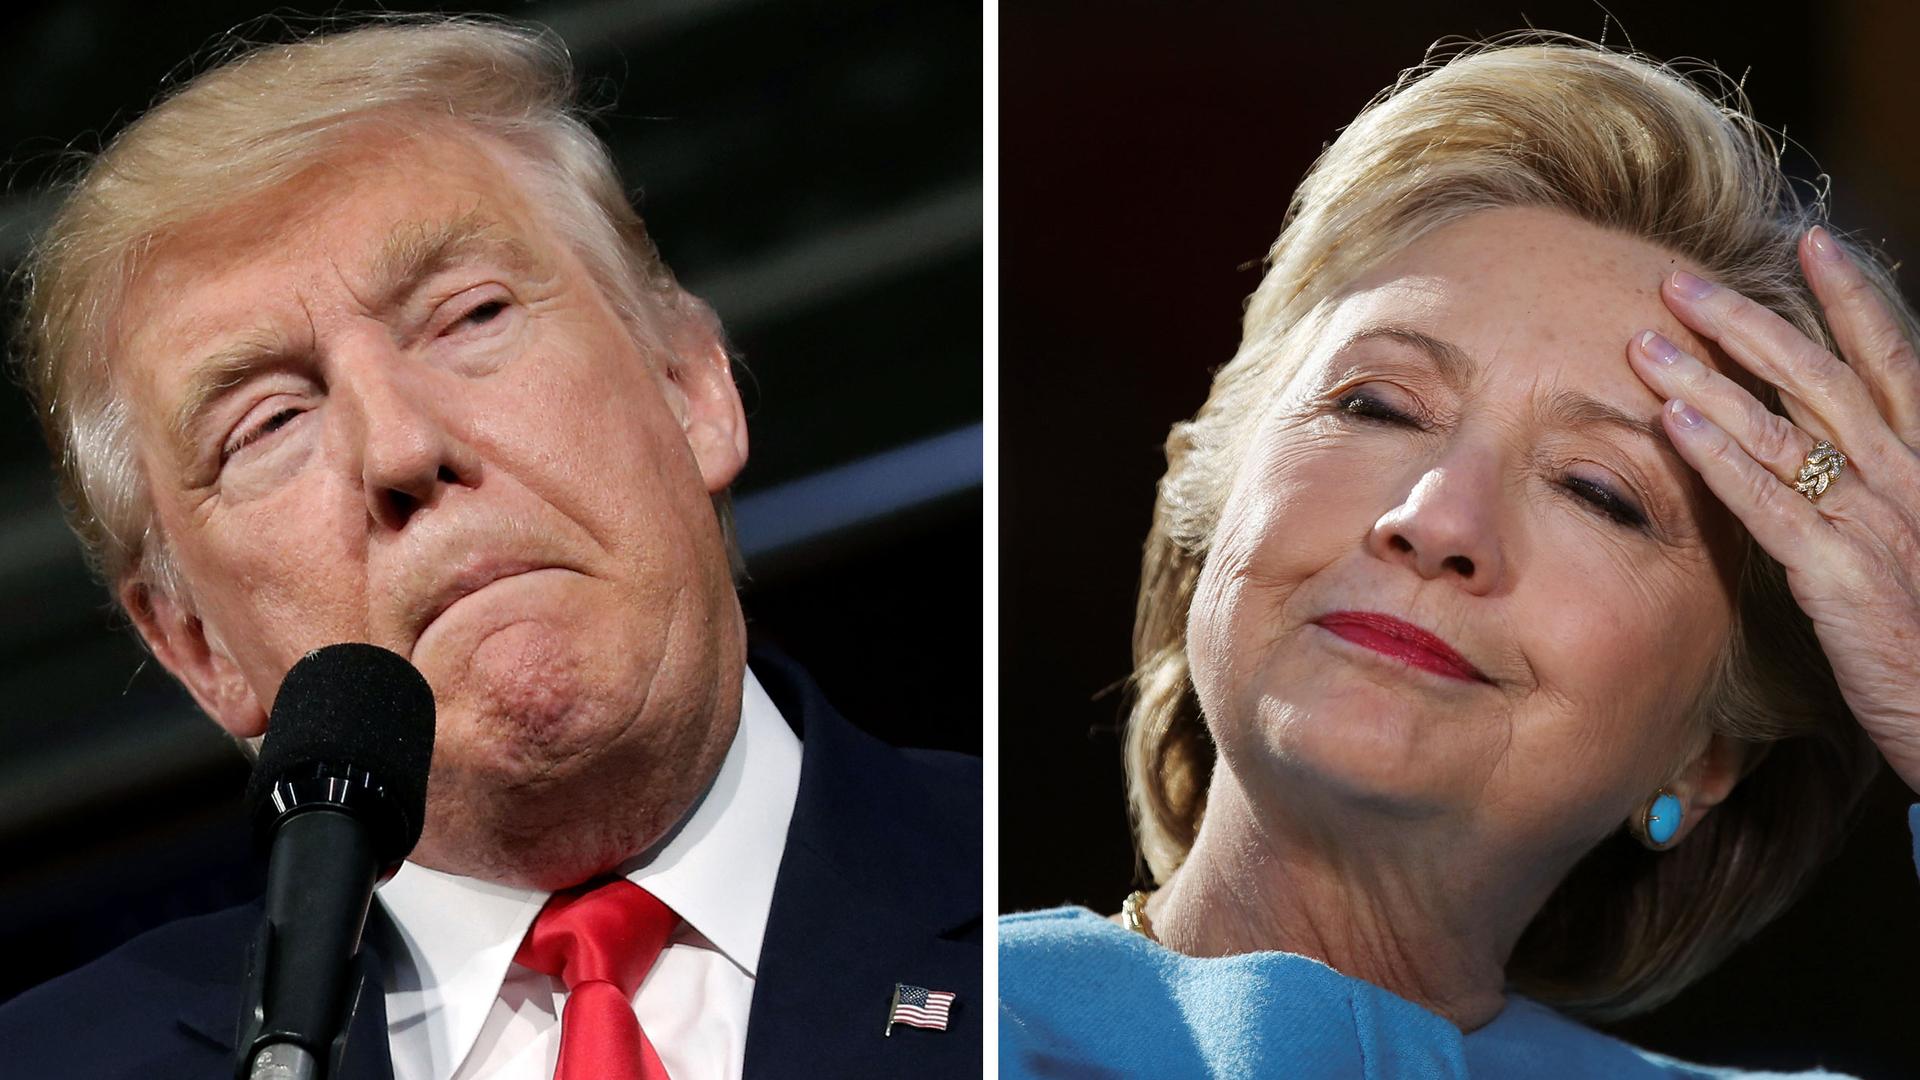 US presidential candidates Donald Trump and Hillary Clinton attend campaign rallies in Ambridge, Pennsylvania, October 10, 2016 and Manchester, New Hampshire, October 24, 2016.